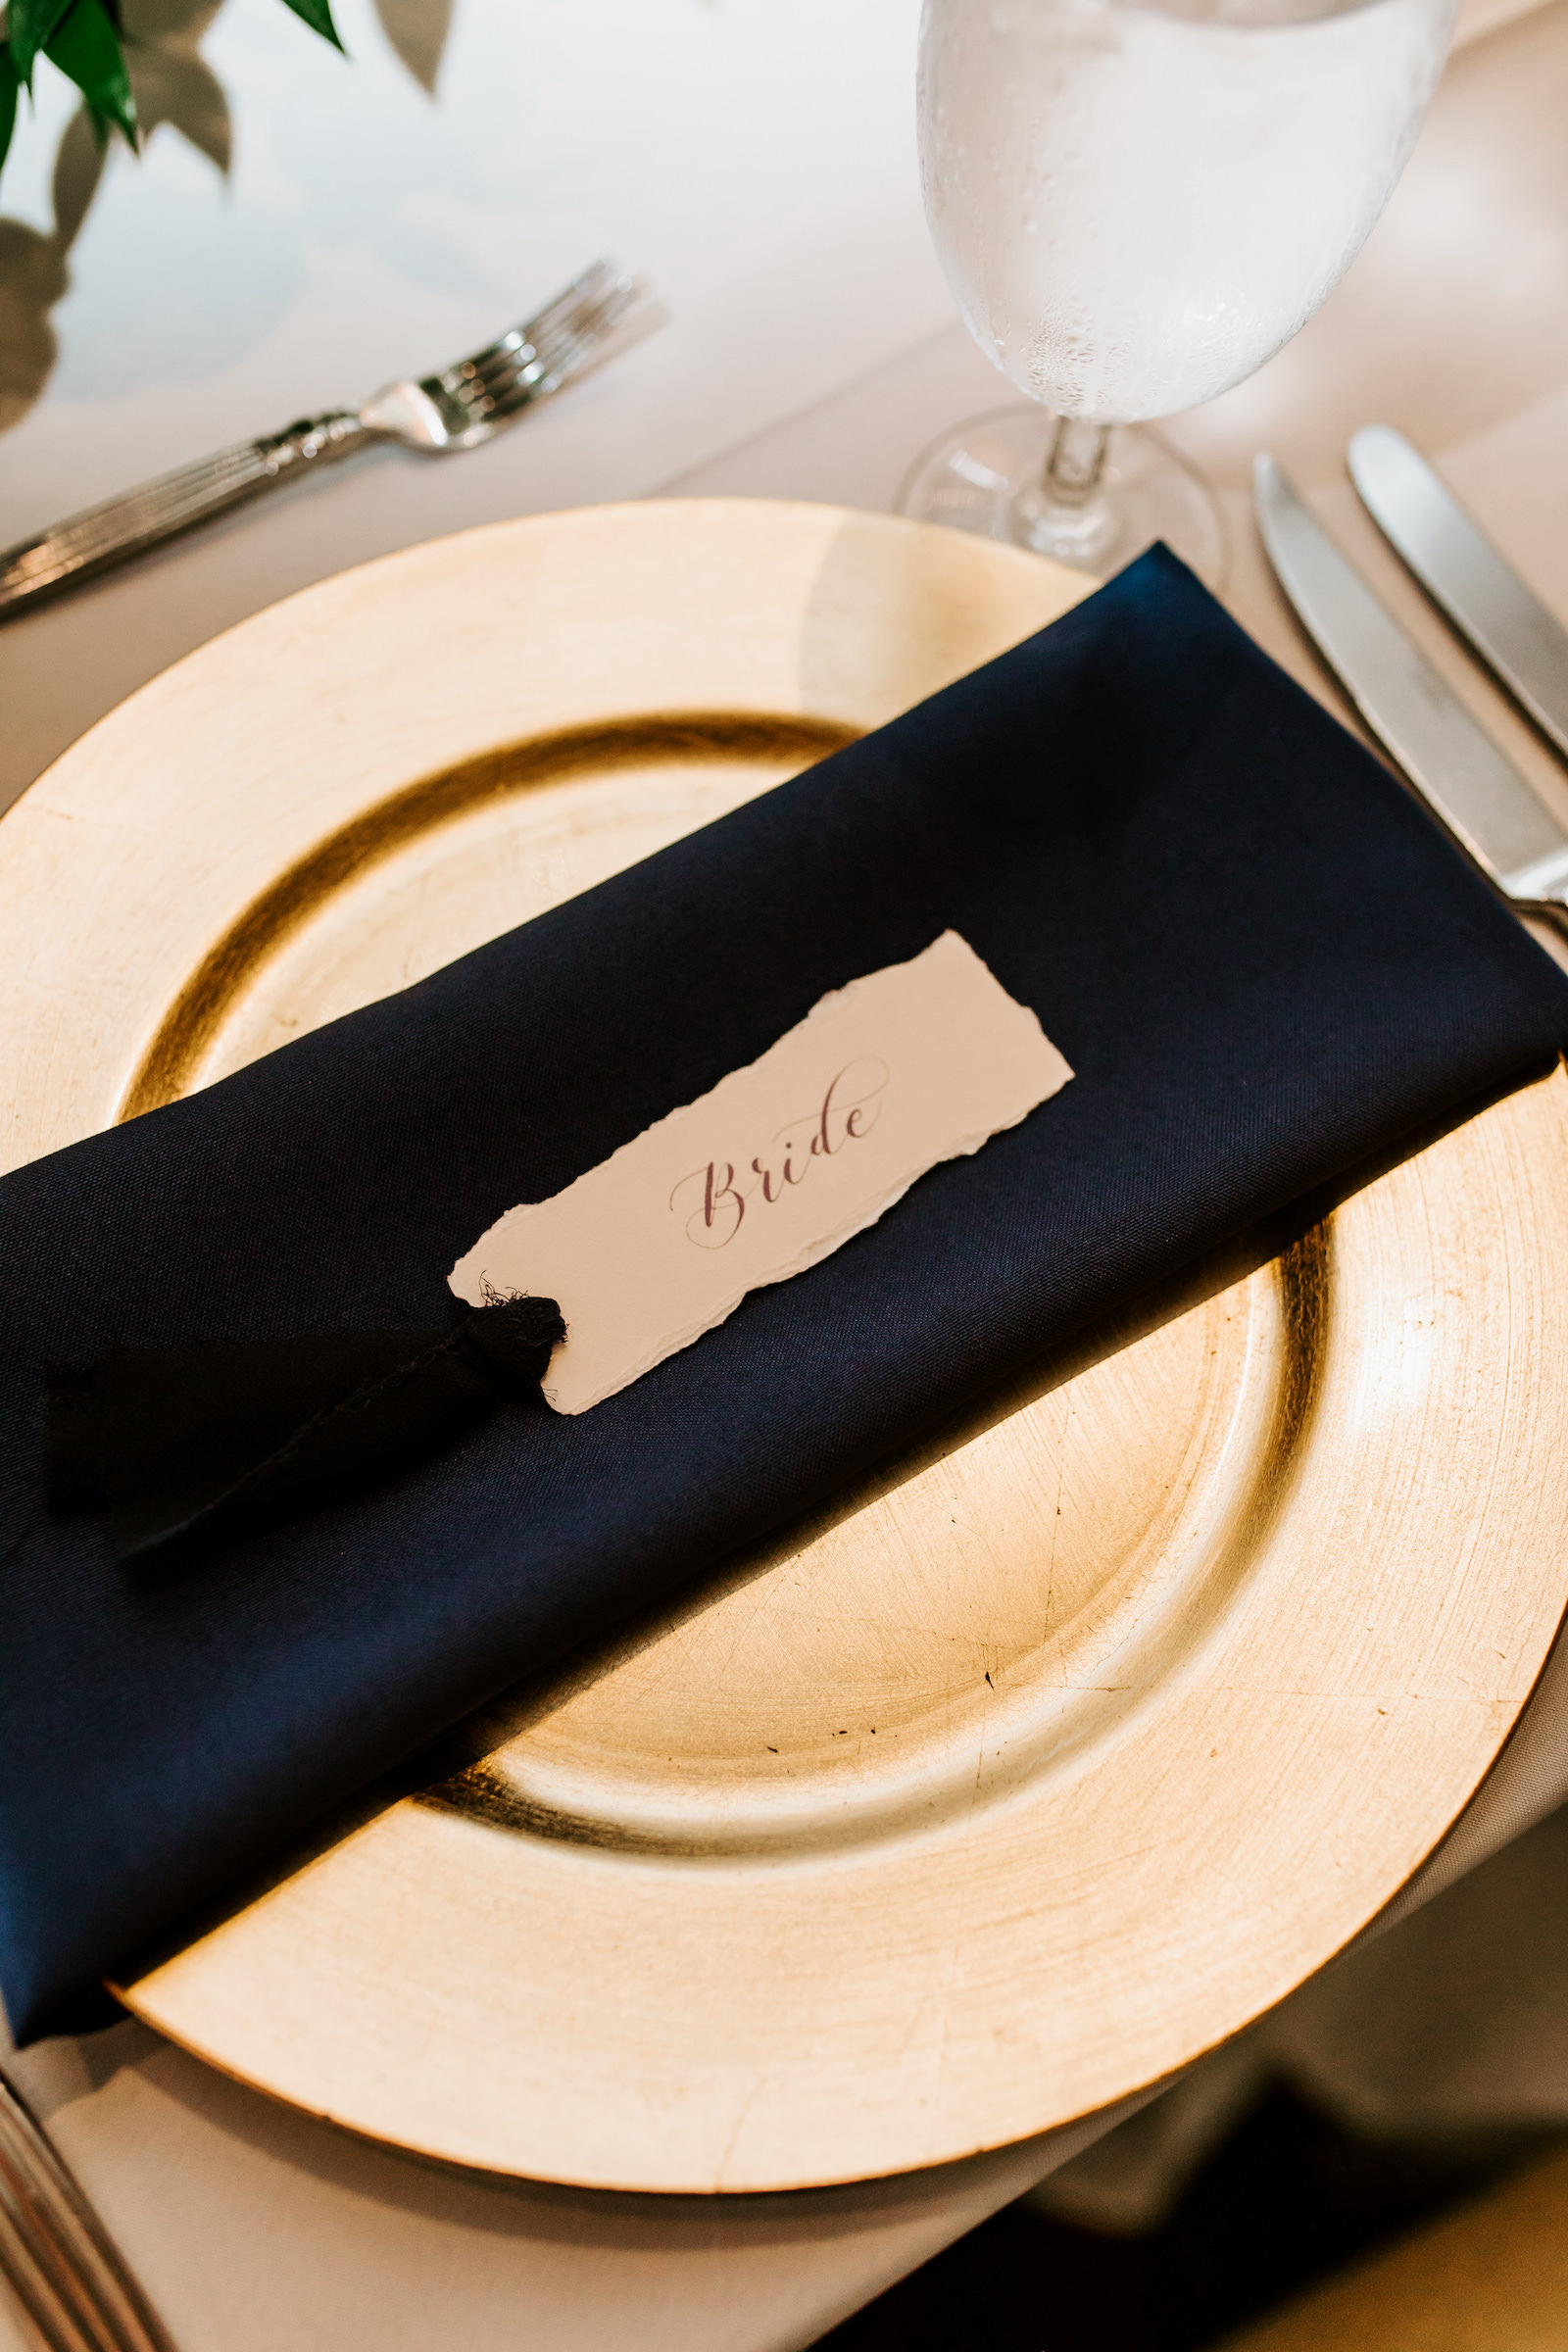 Wedding Place Setting with Gold Charger Plate and Navy Blue Napkin Wrap topped with Raw Deckle Edge Place Card